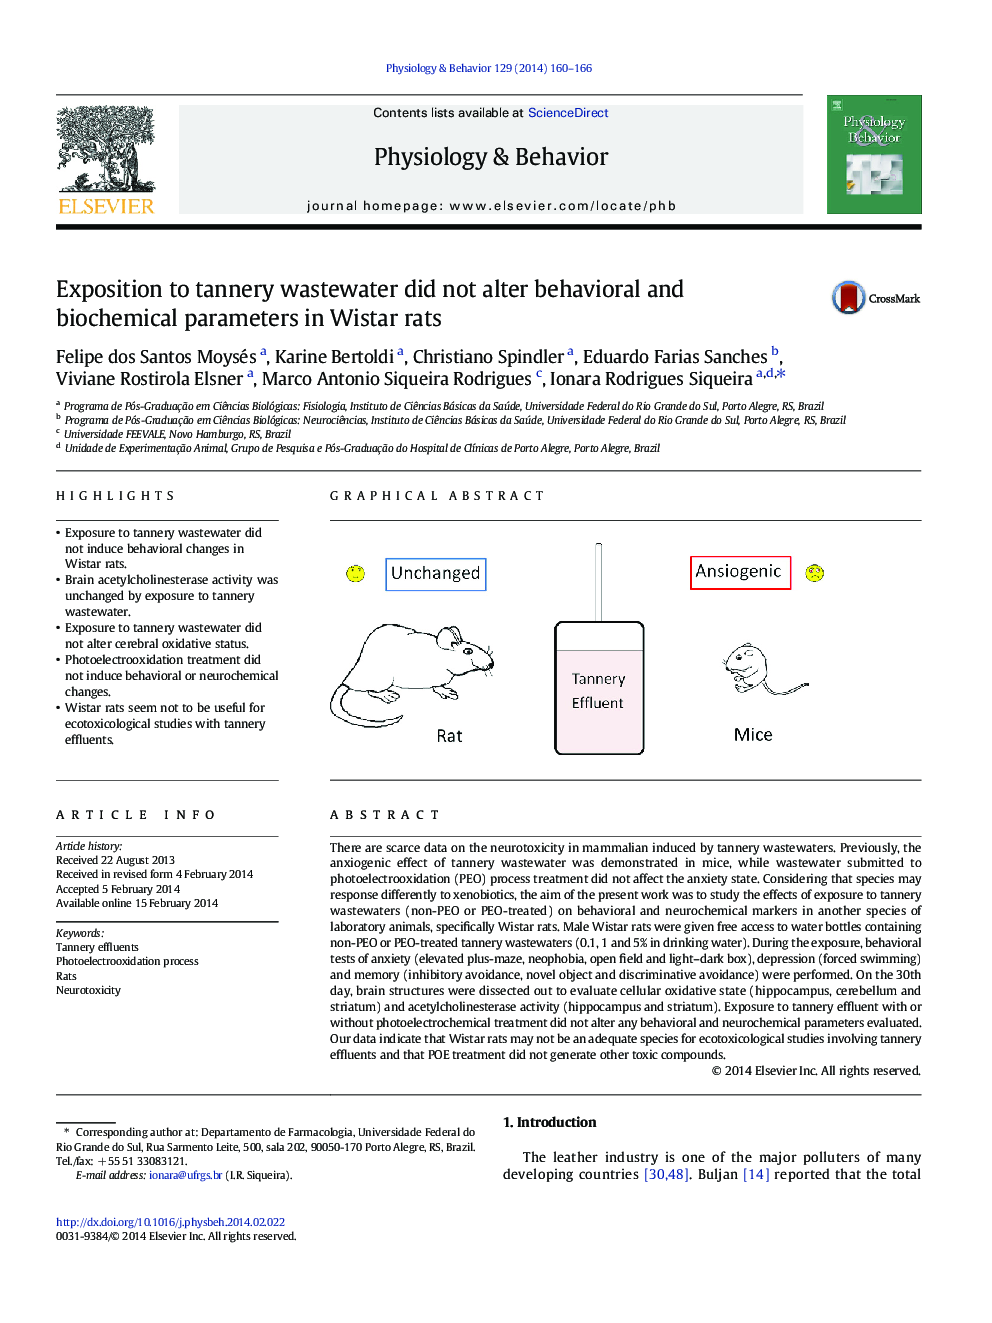 Exposition to tannery wastewater did not alter behavioral and biochemical parameters in Wistar rats